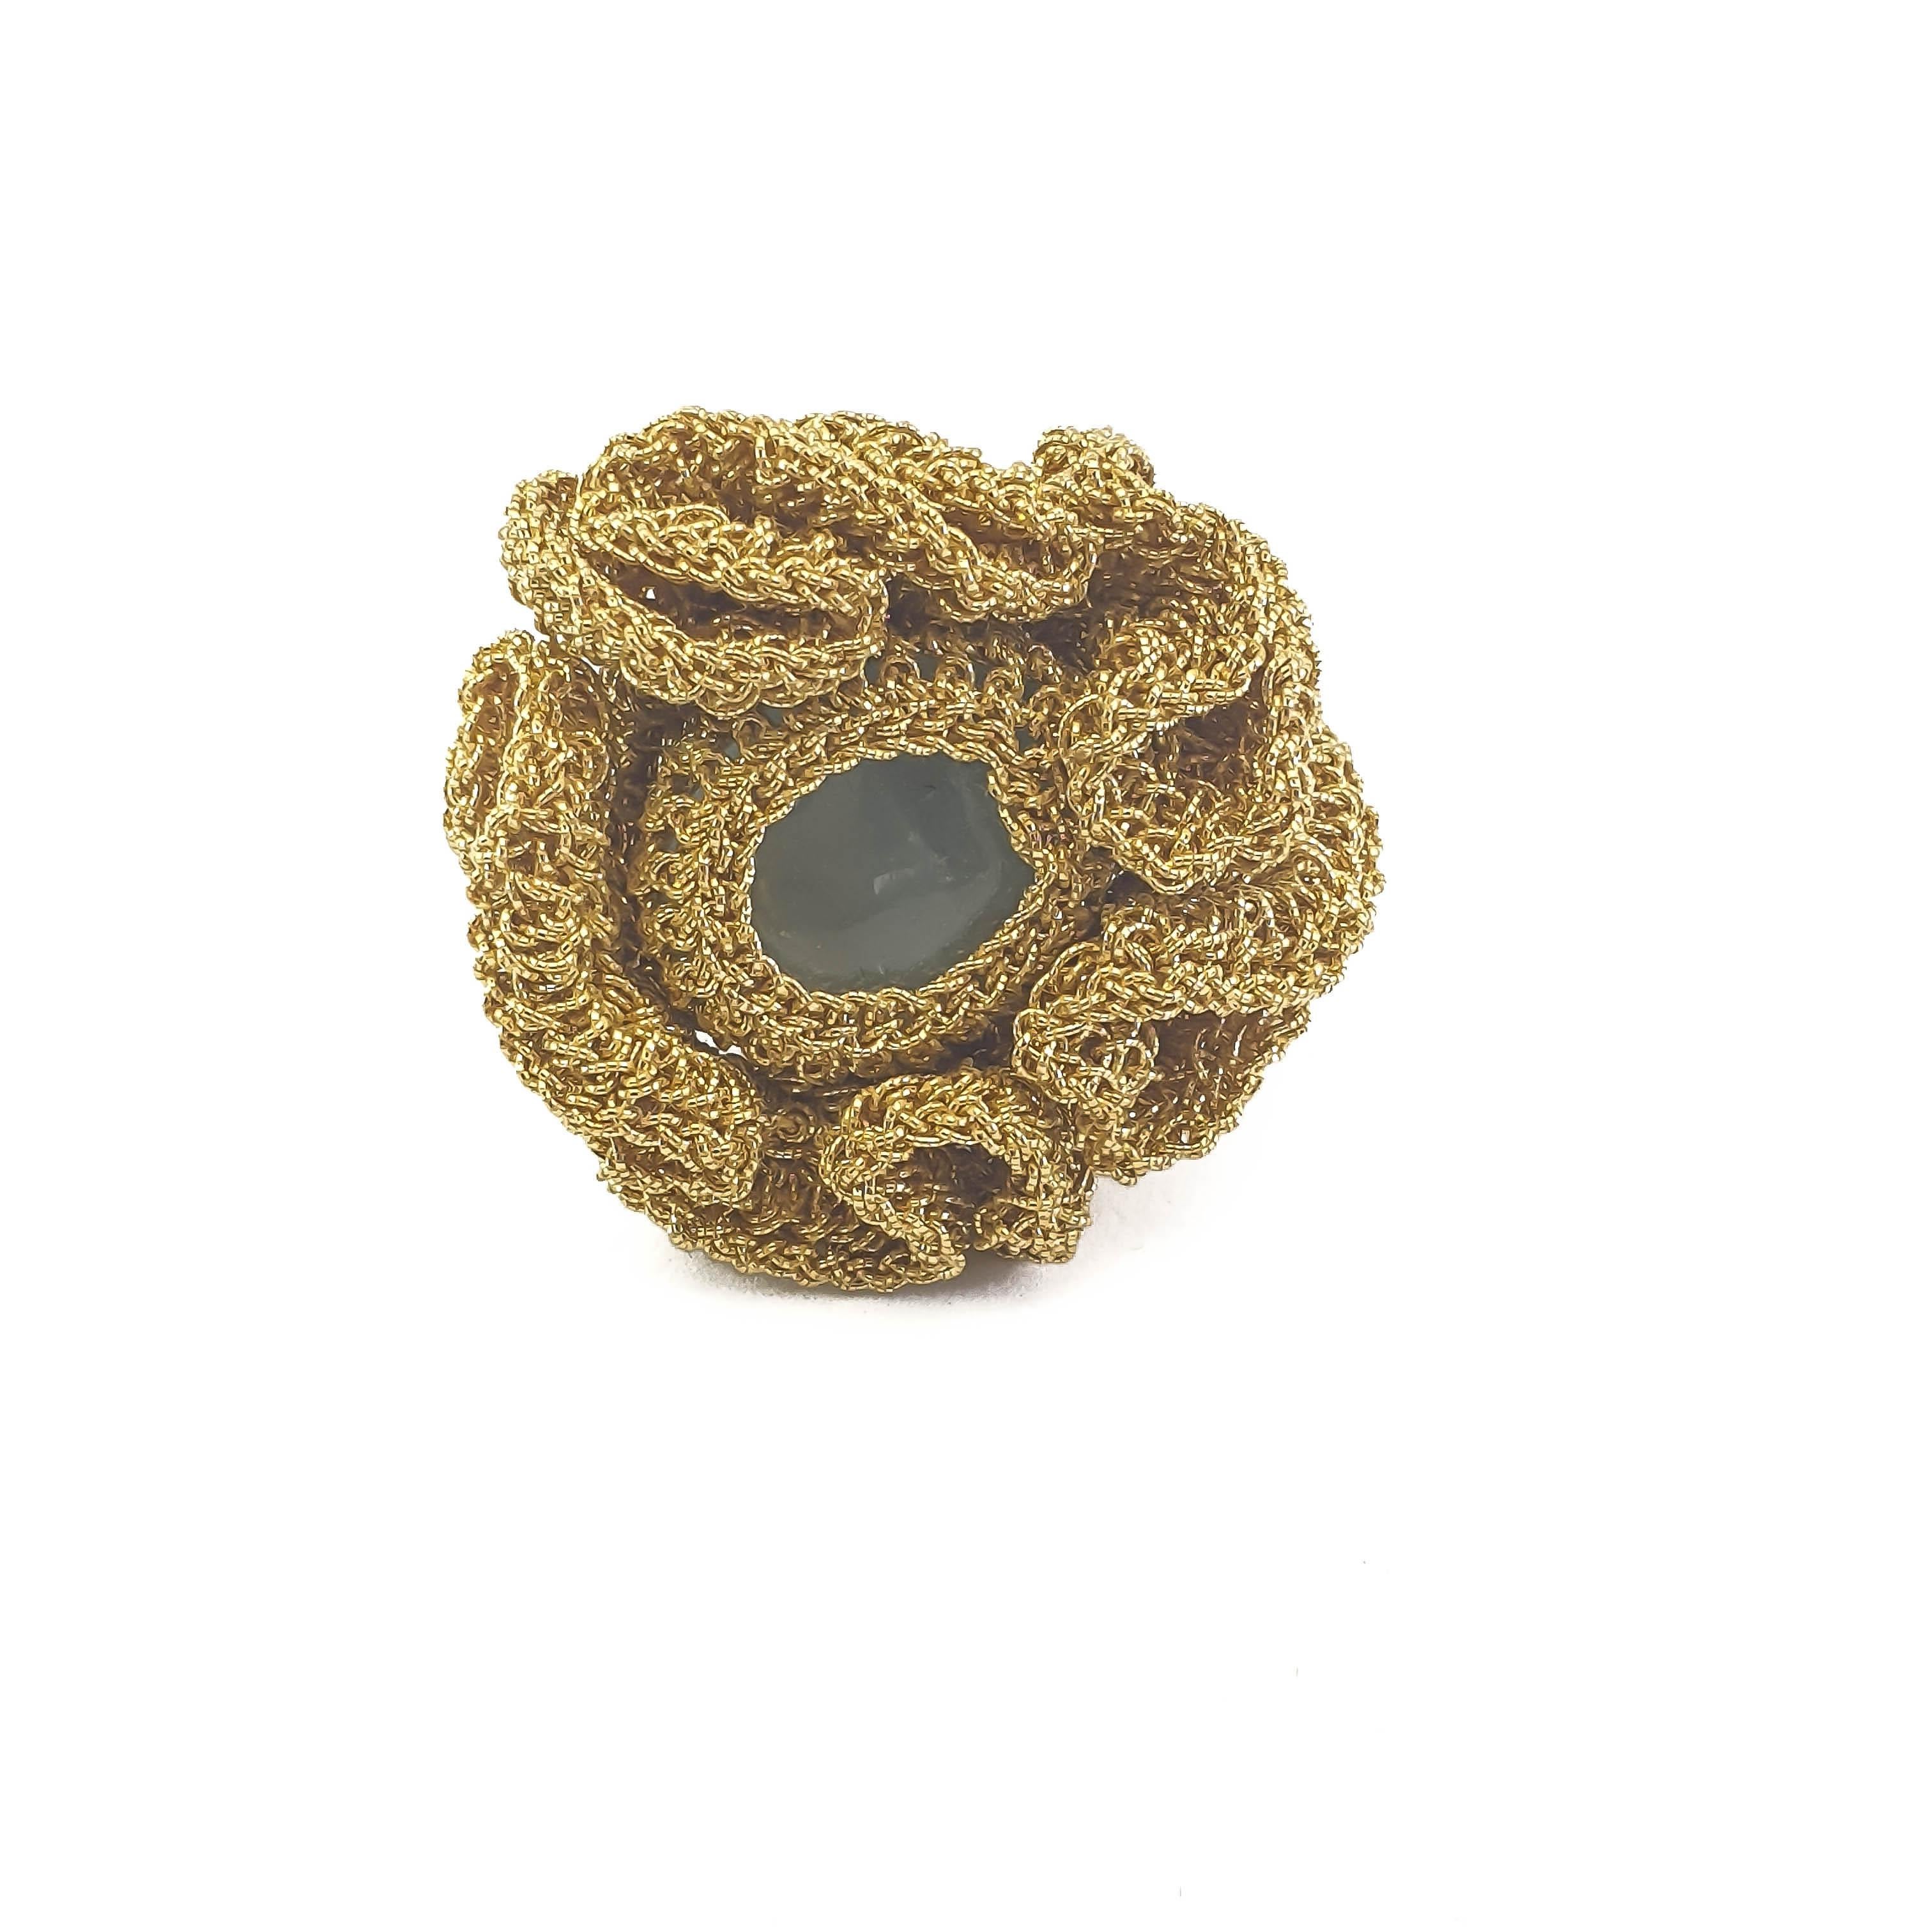 A beautifully crafted, crochet ring. Handmade with 18 Karat gold thread (13.25 grams) and a milky light blue Aquamarine (weighing 1.75 grams/8.75 carats). This ring is a US size 7. It can be stretched a little to fit larger sizes. This ring can be